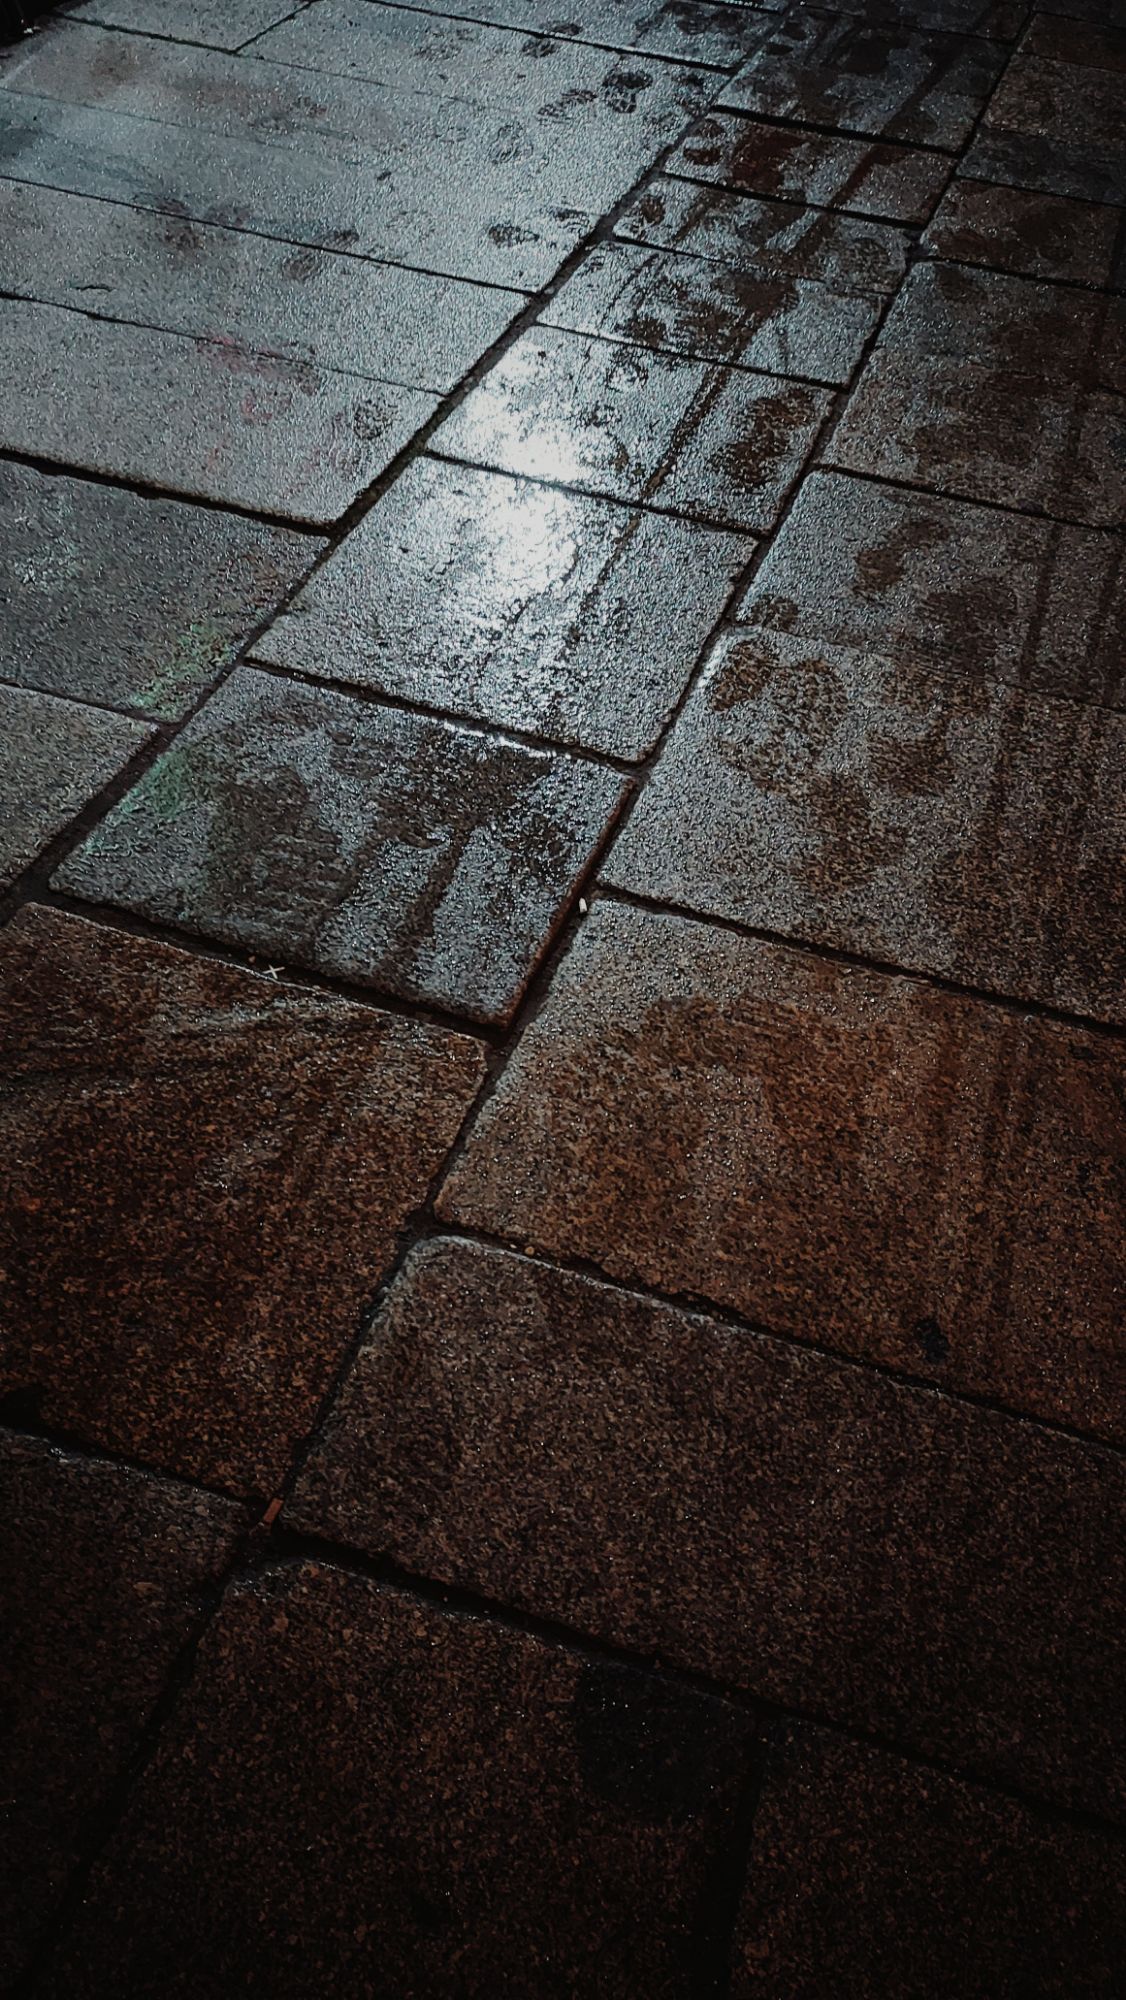 Different kinds of traces on a wet sidewalk.